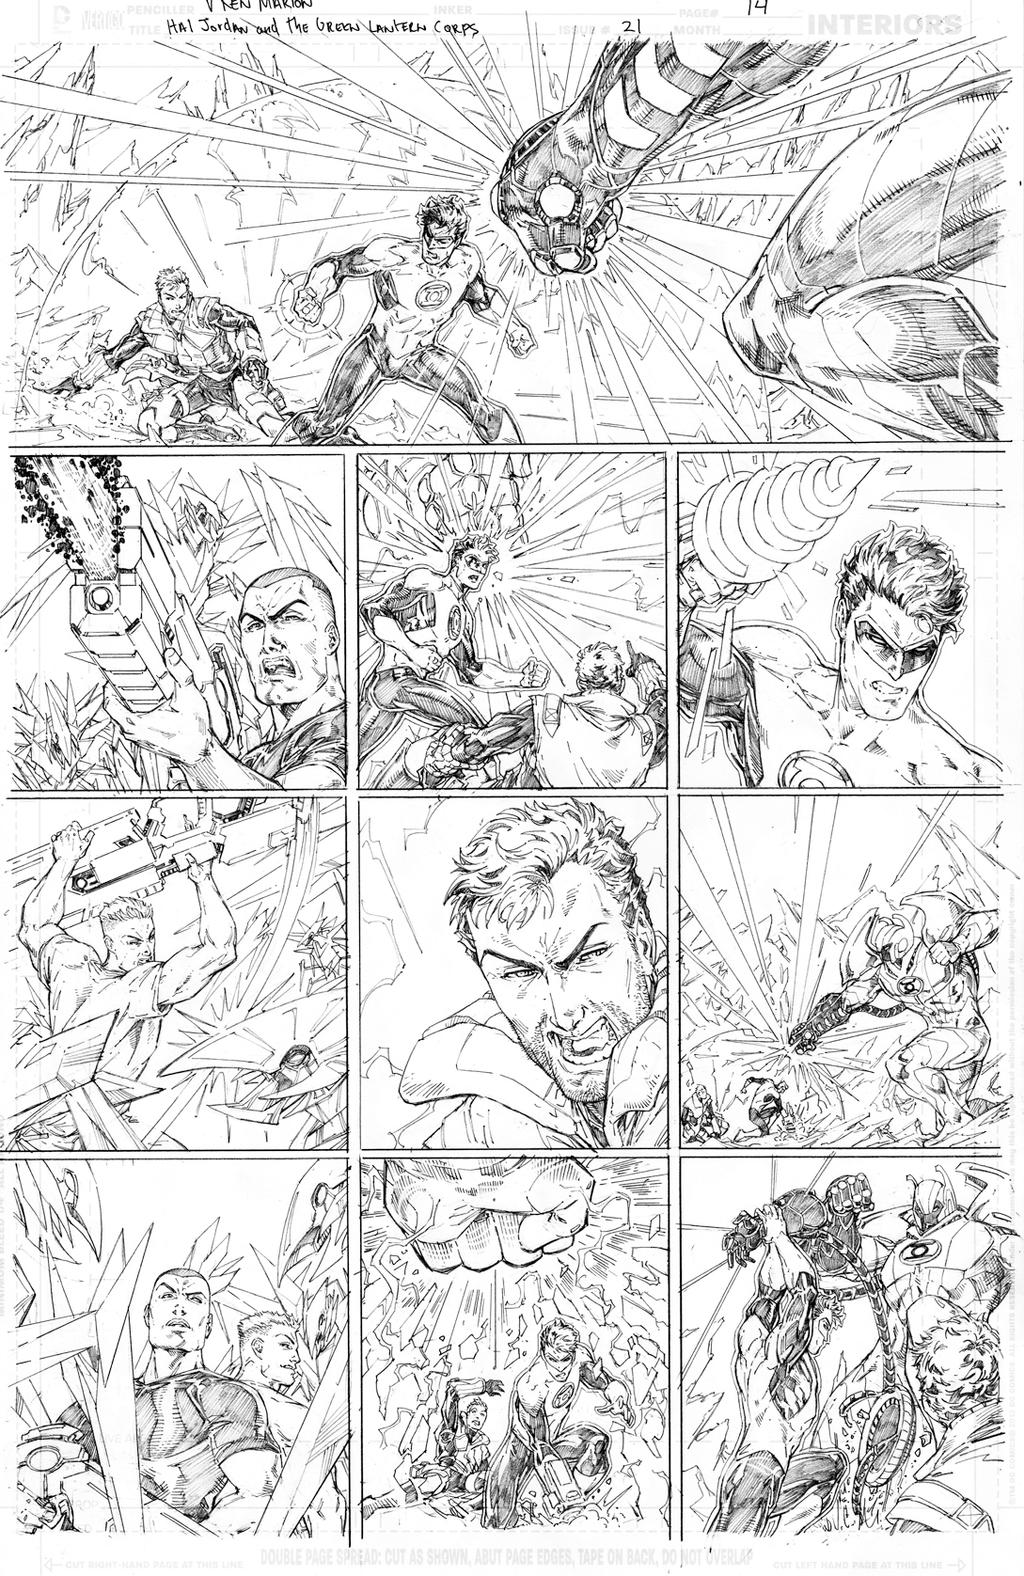 Hal Jordan and the Green Lantern Corps #21 page 14